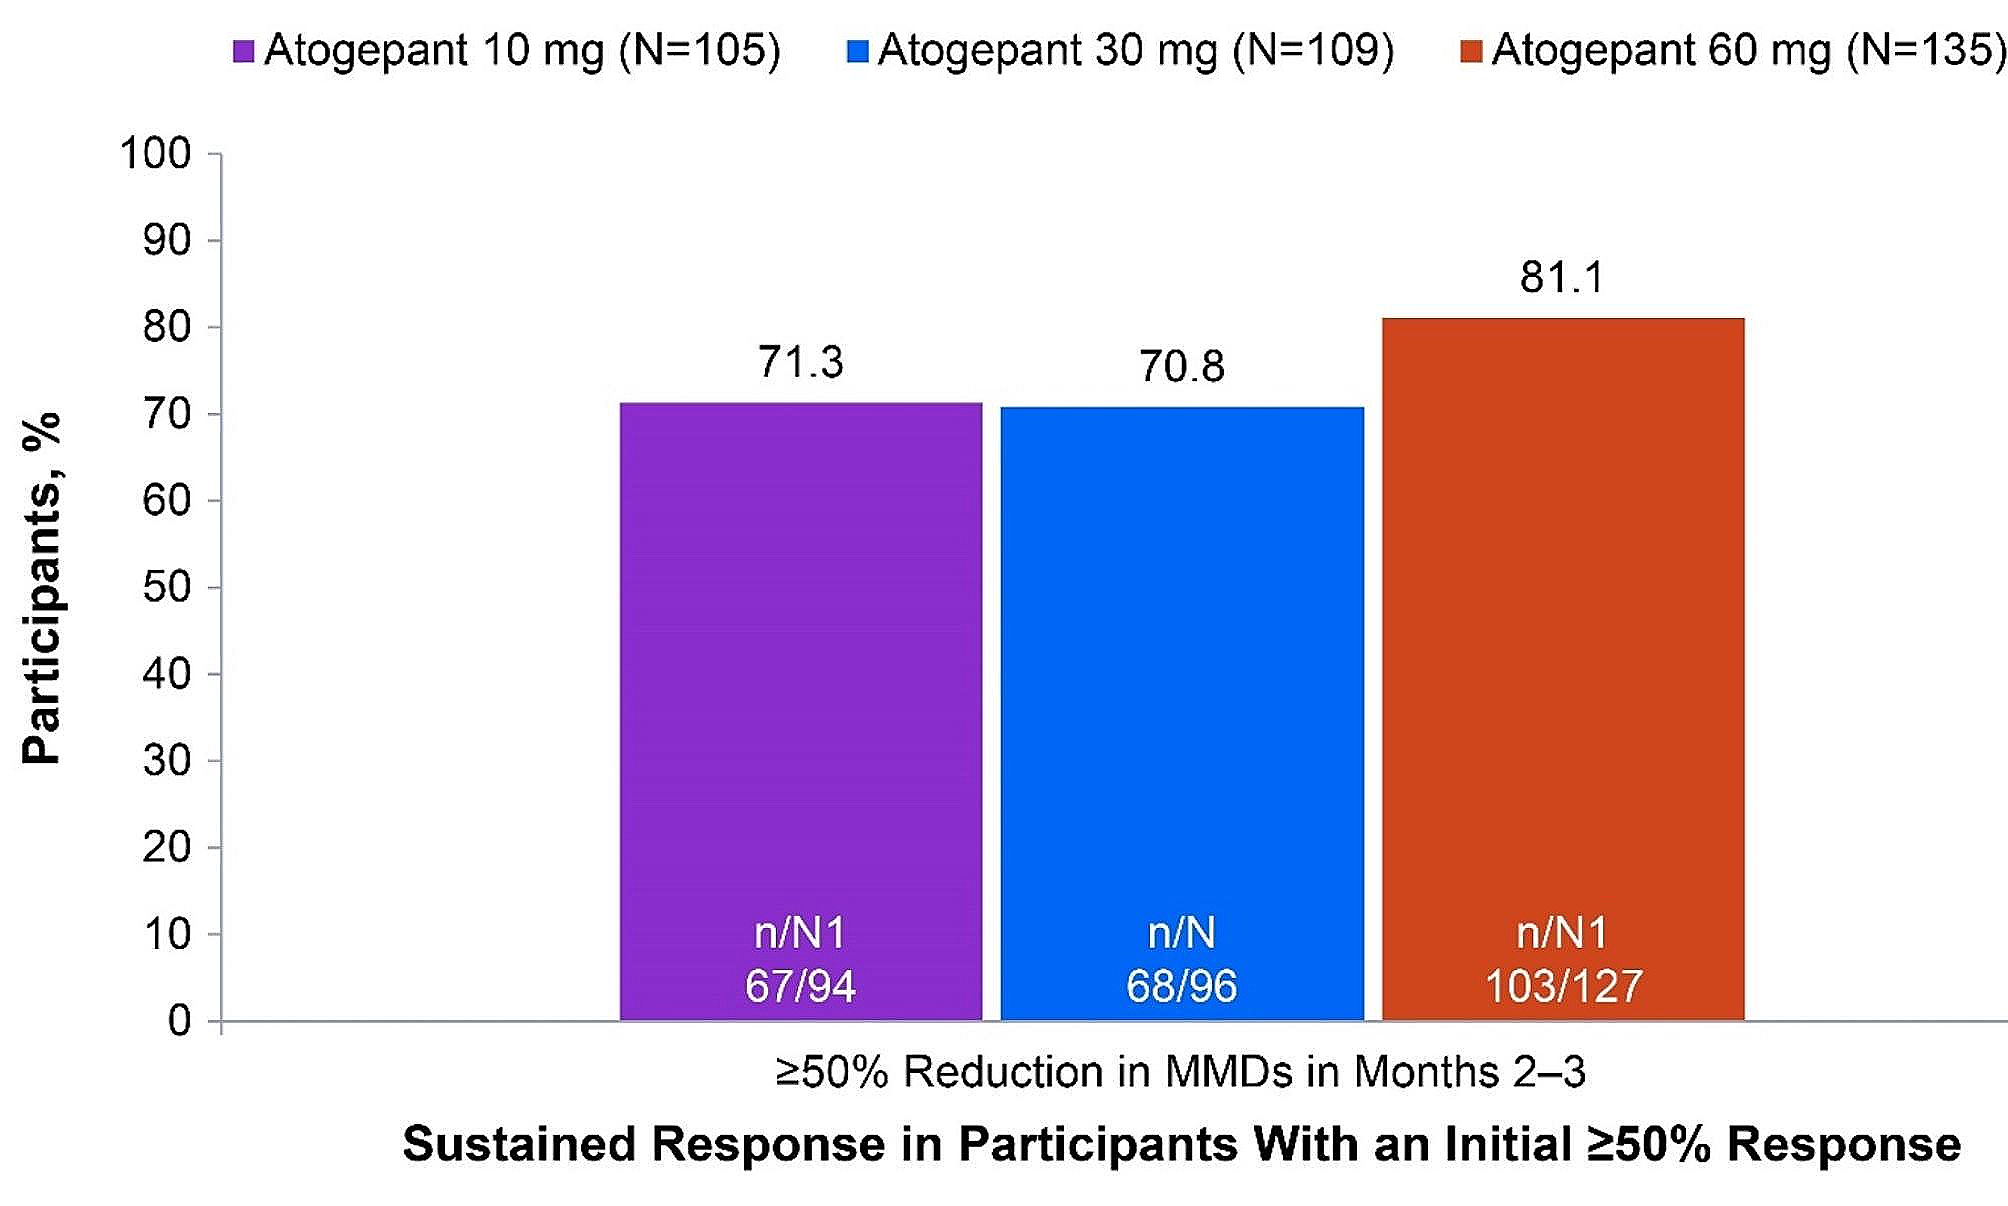 Sustained response to atogepant in episodic migraine: post hoc analyses of a 12-week randomized trial and a 52-week long-term safety trial